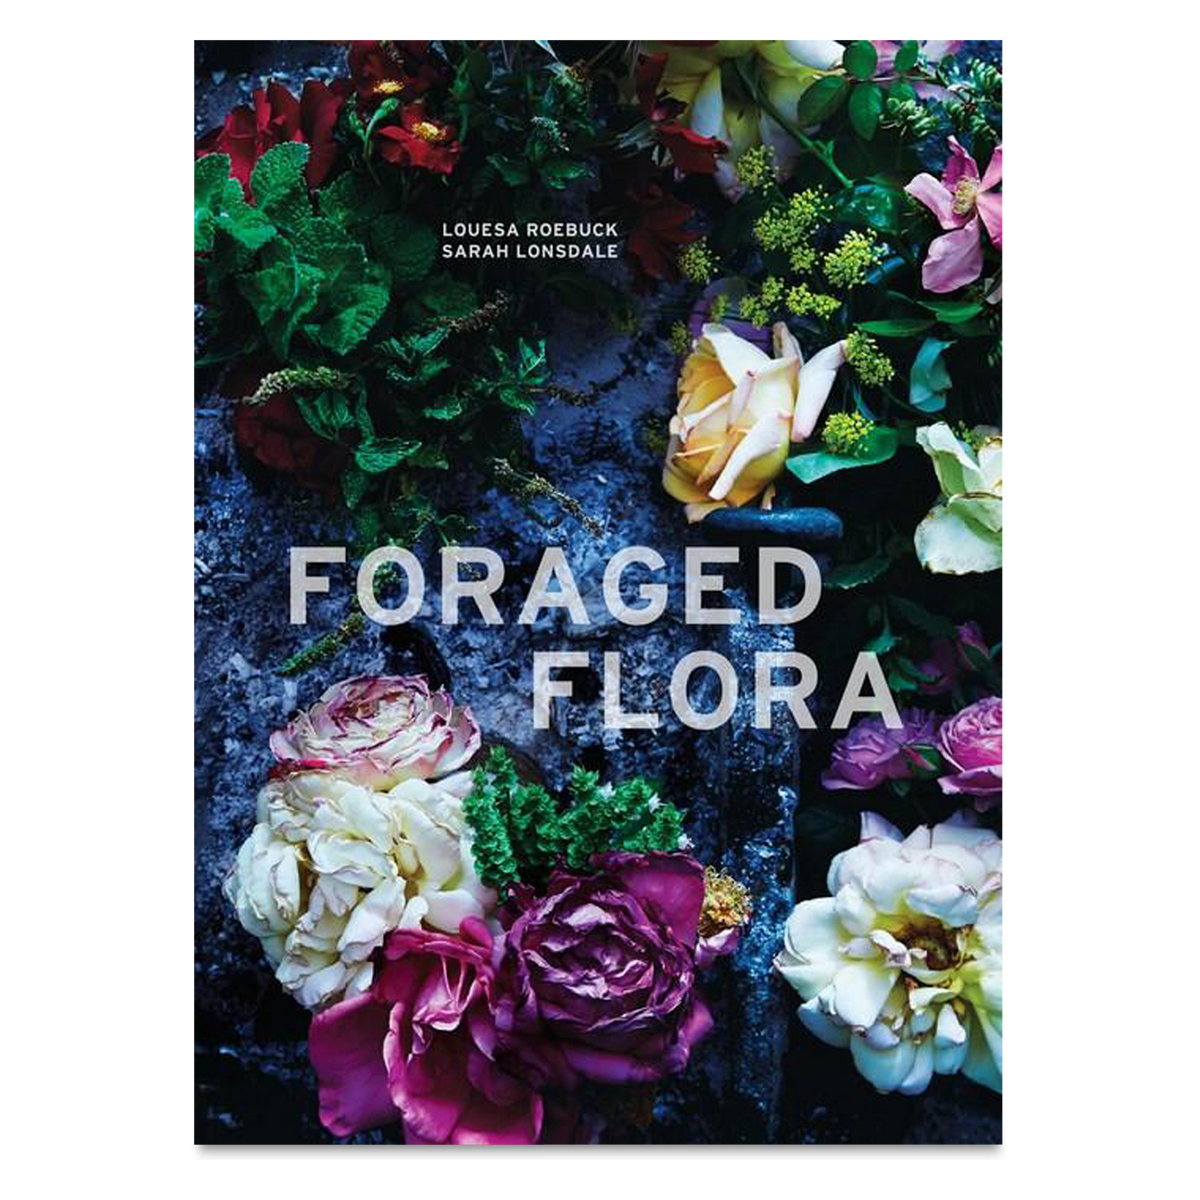 Roadside fennel, flowering fruit trees, garden roses, tiny violets; ingredients both common and unusual, humble and showy, Foraged Flora is a new vision for flowers and arranging.